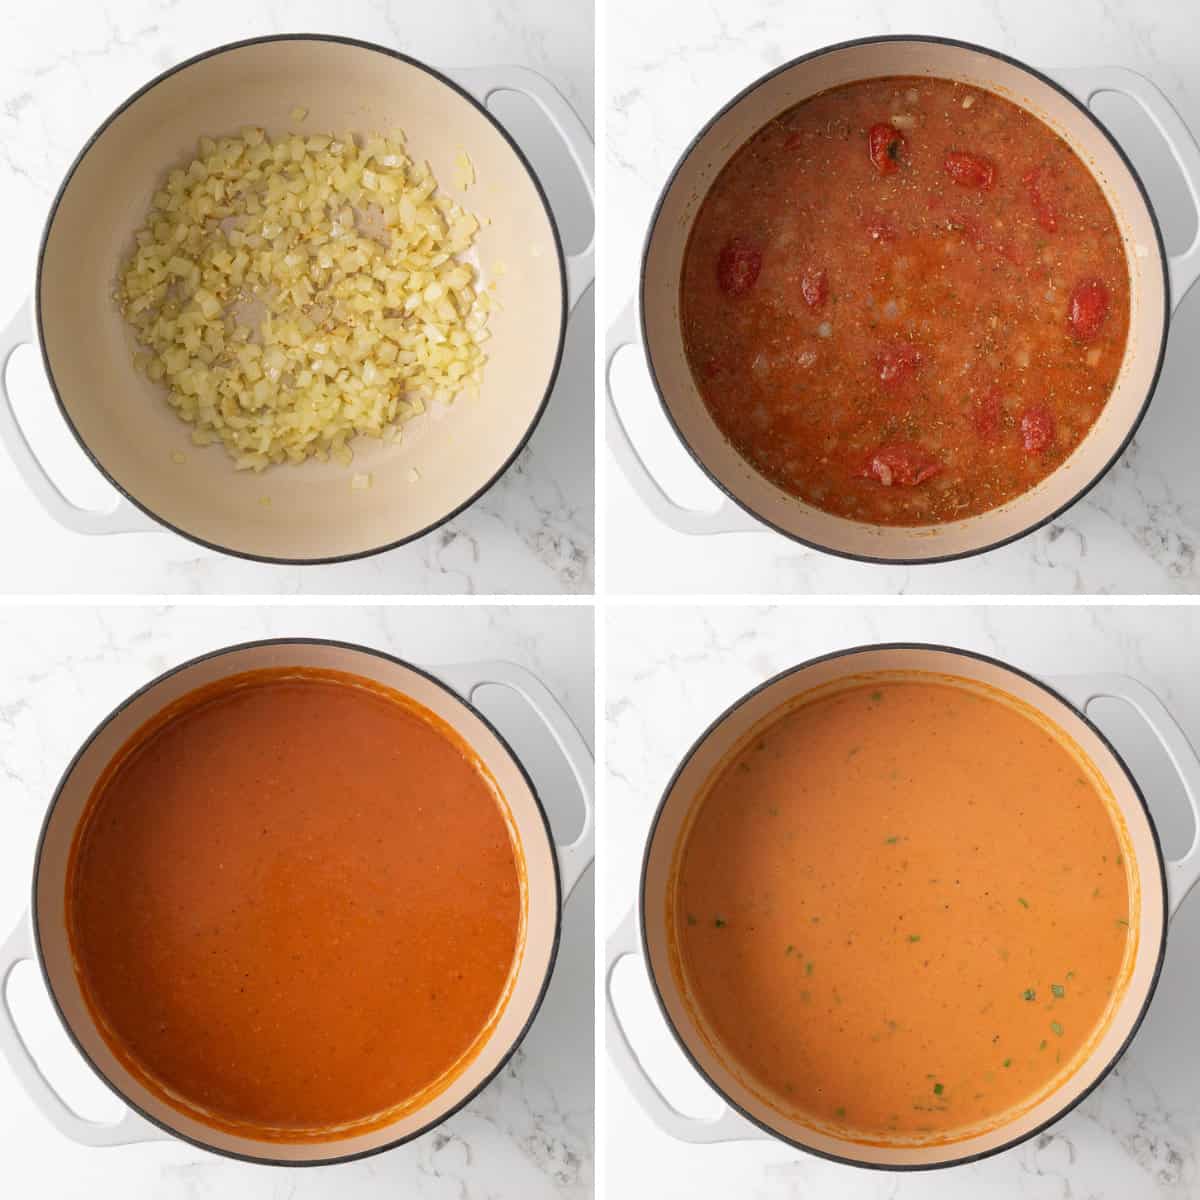 Steps showing how to make creamy tomato basil soup.